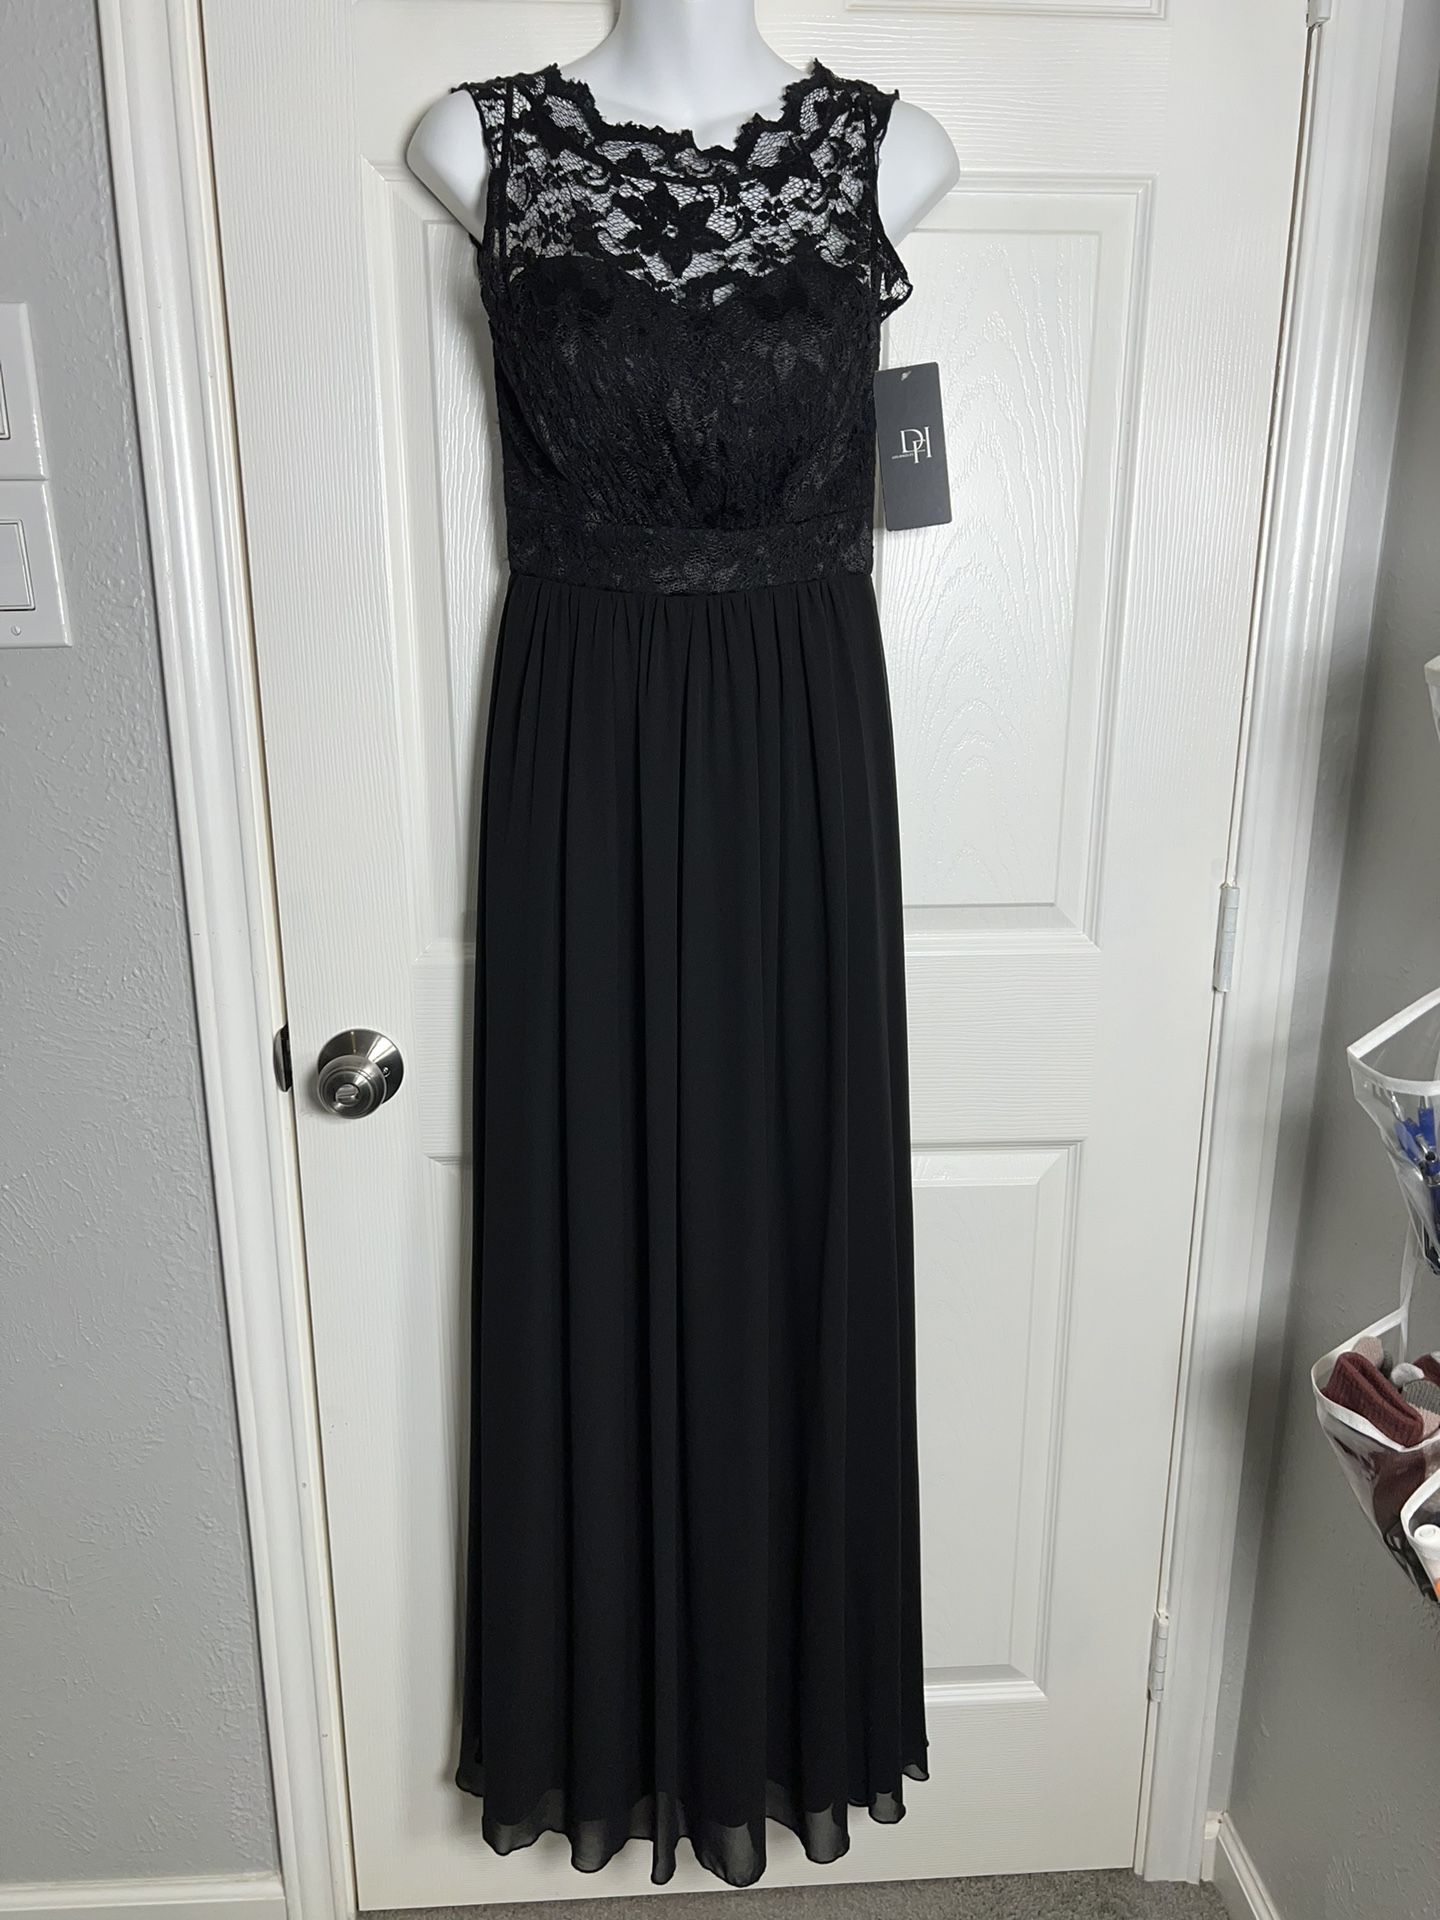 Black Lace Bodice Full Length Evening Gown